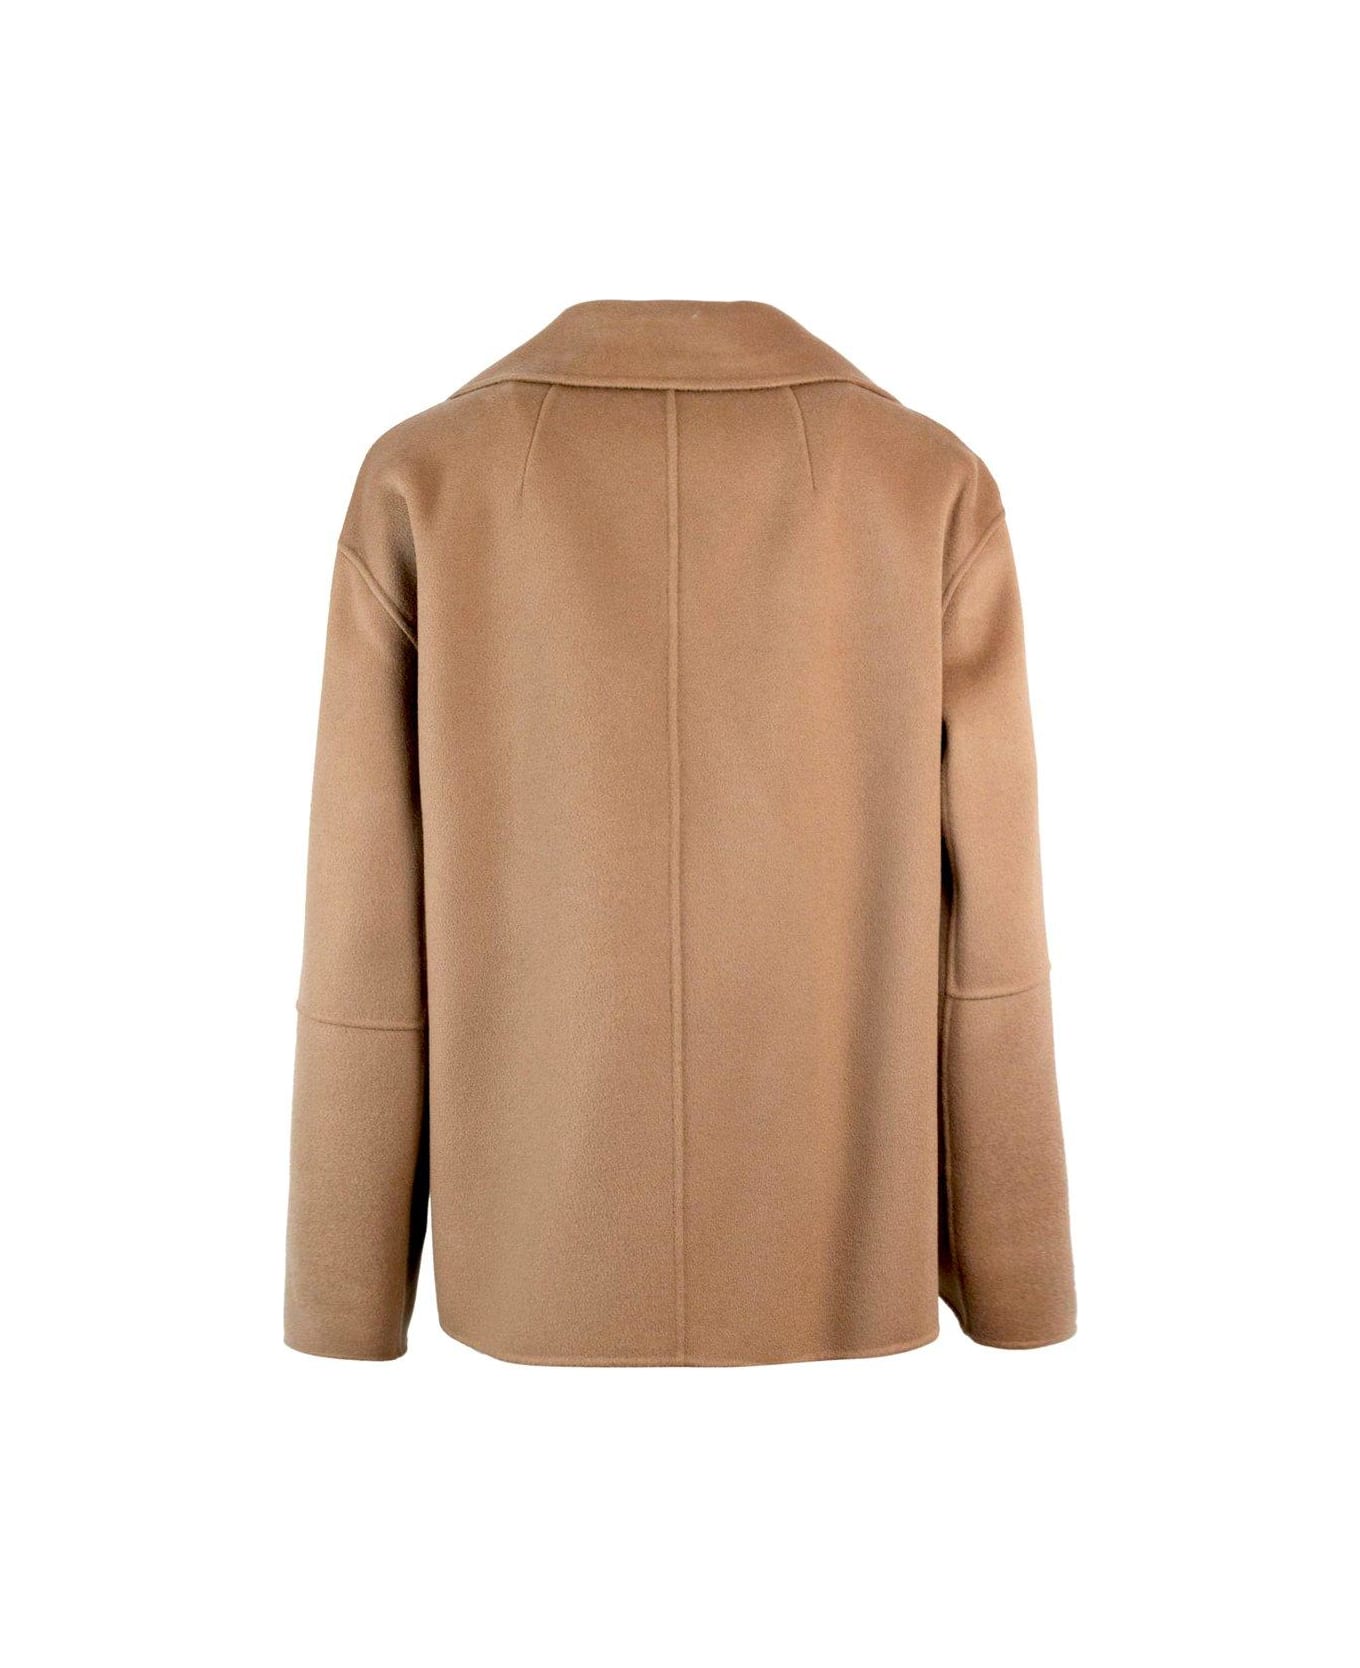 'S Max Mara Double-breasted Long-sleeved Jacket - Mou コート